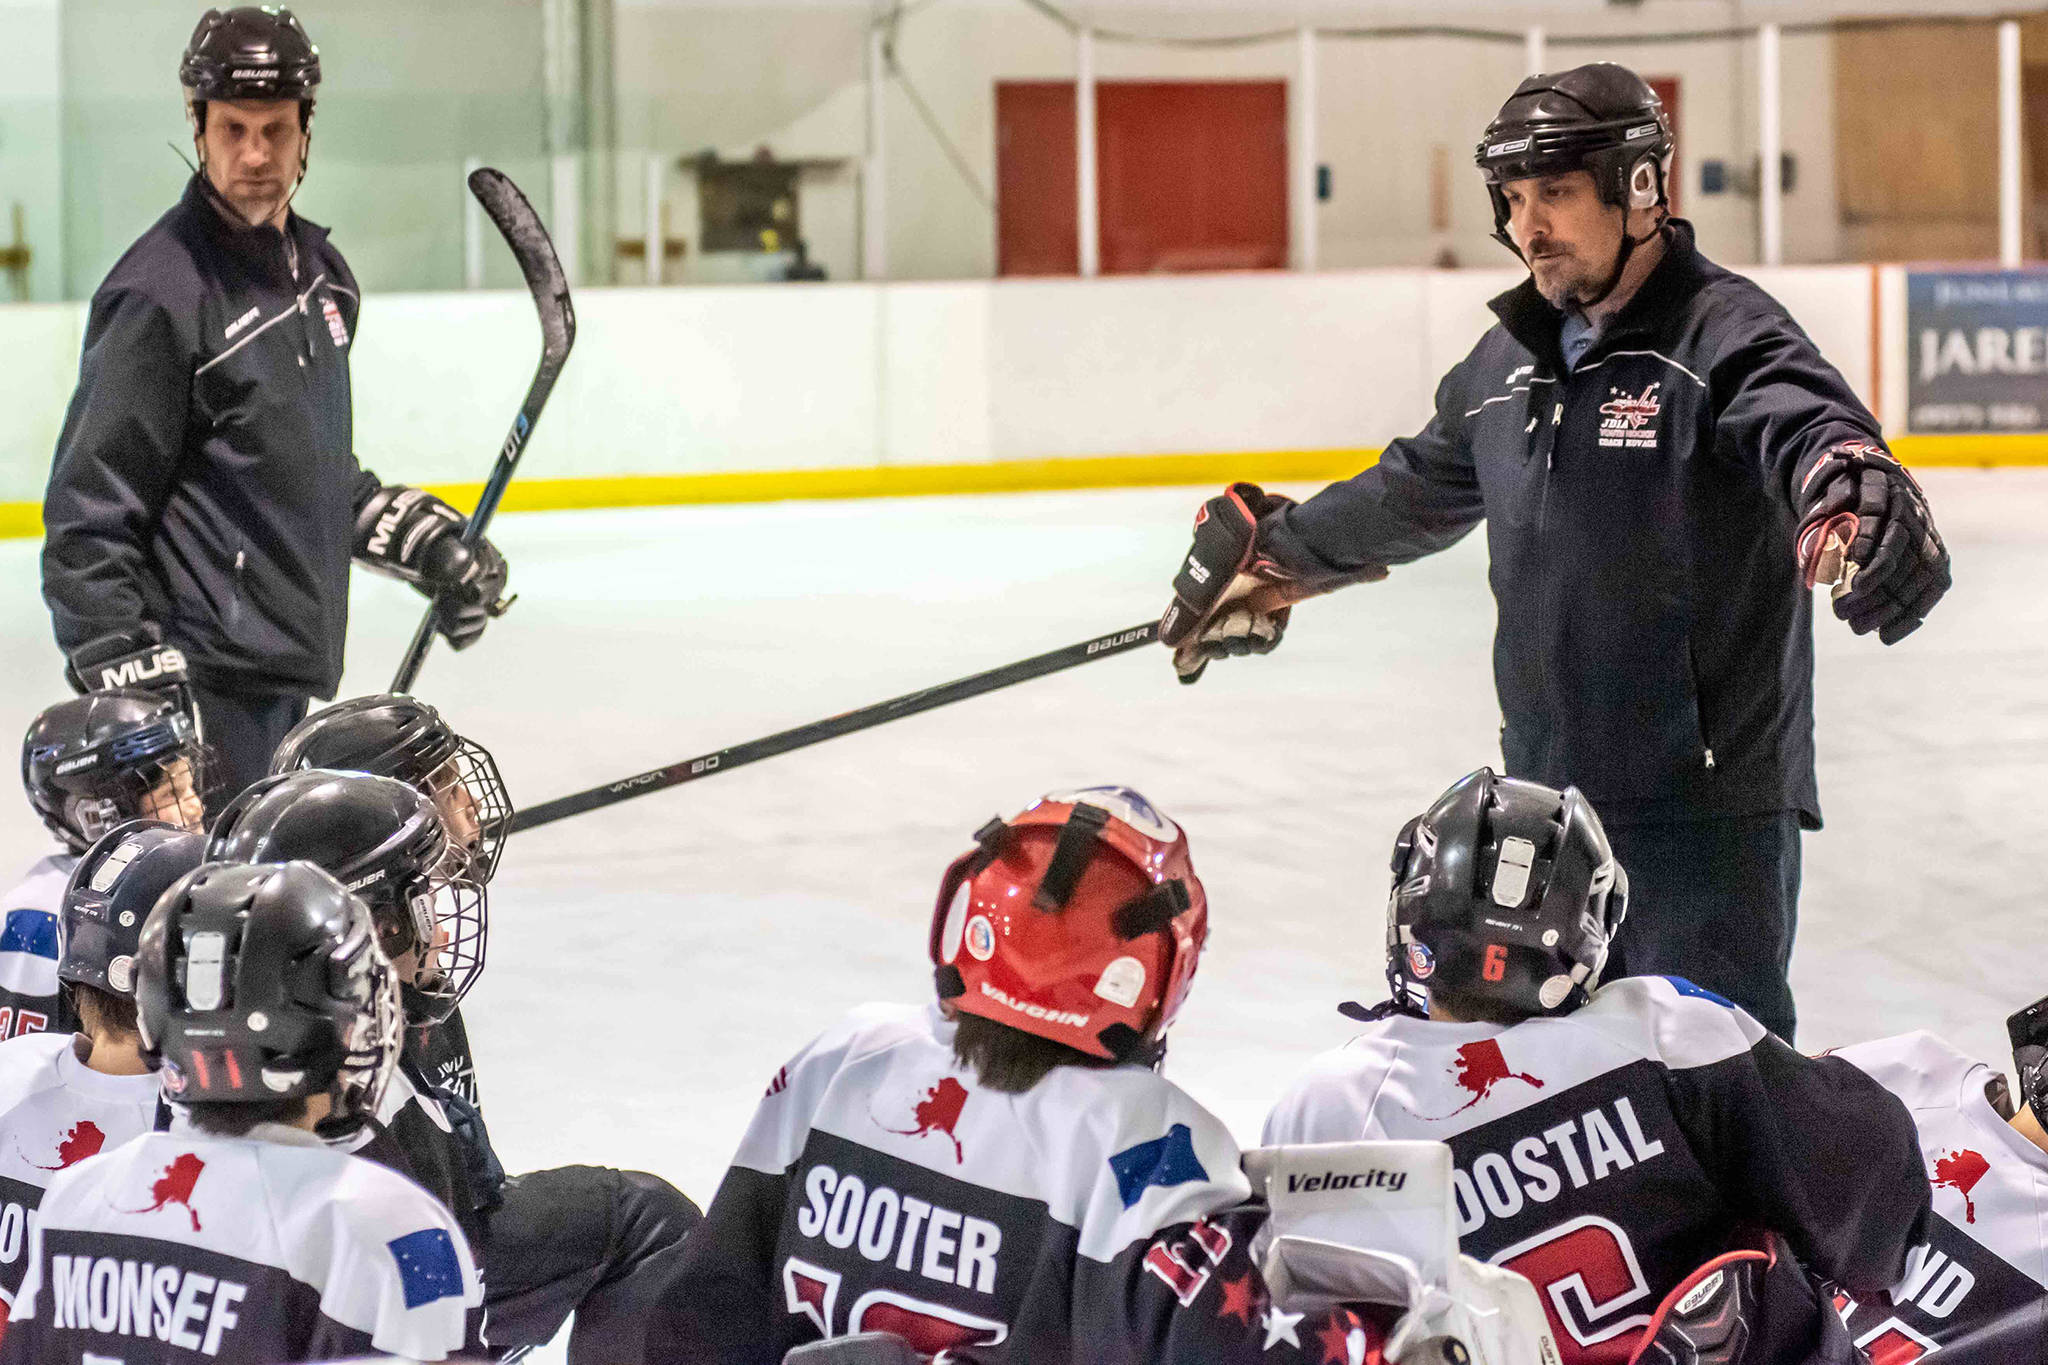 Juneau Capitals 12U AA coach Dave Kovach, left, instructs his players during practice. (Courtesy Photo | Steve Quinn)